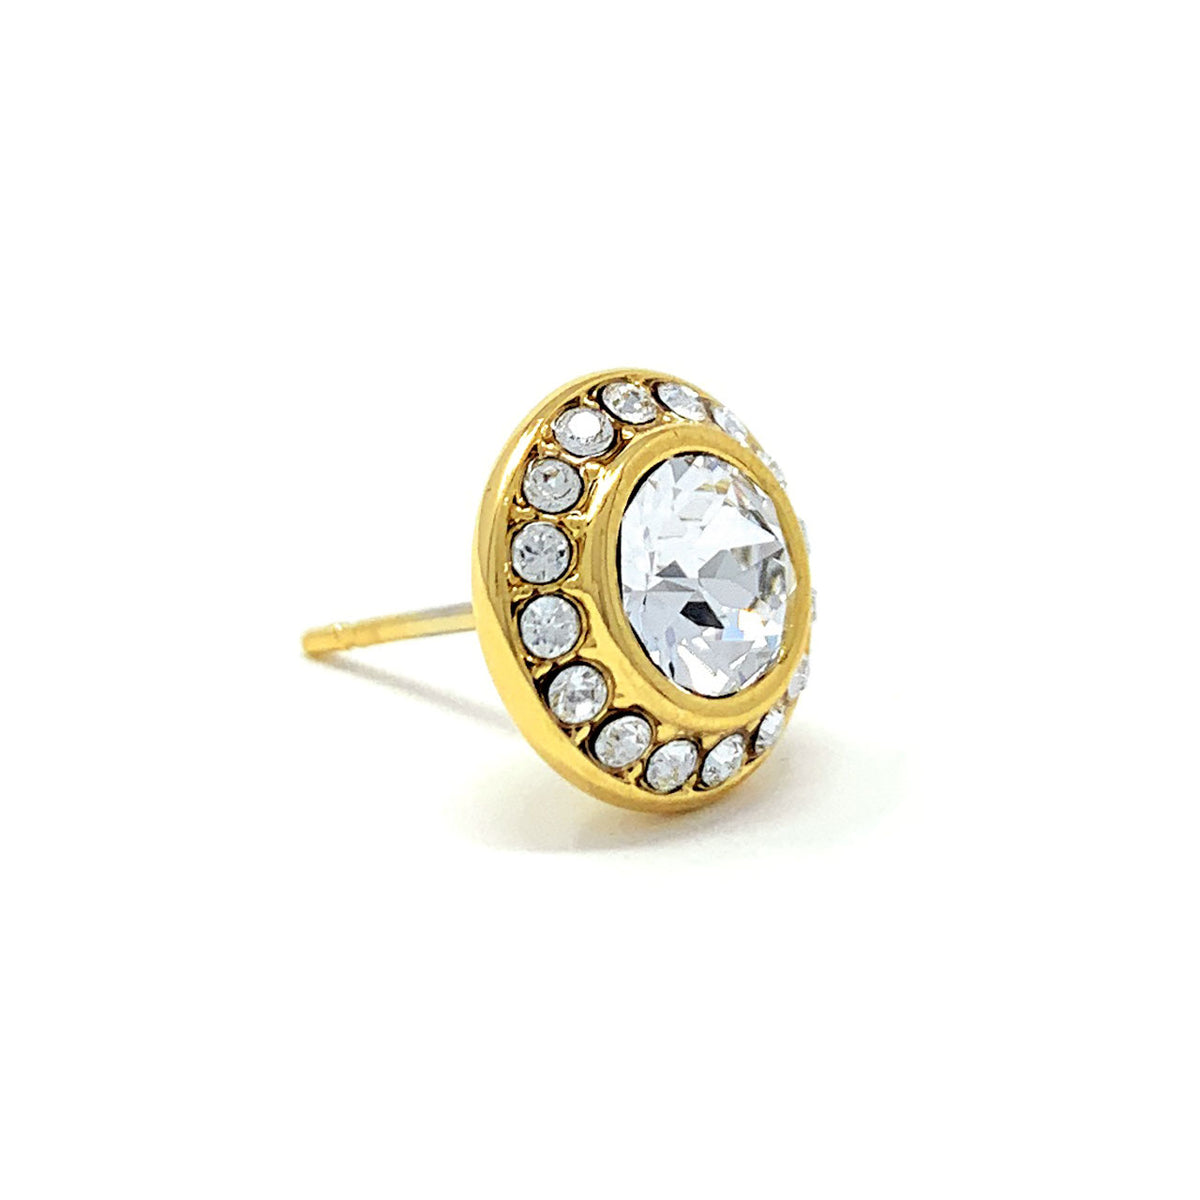 Halo Pave Stud Earrings with White Clear Round Crystals from Swarovski Gold Plated - Ed Heart